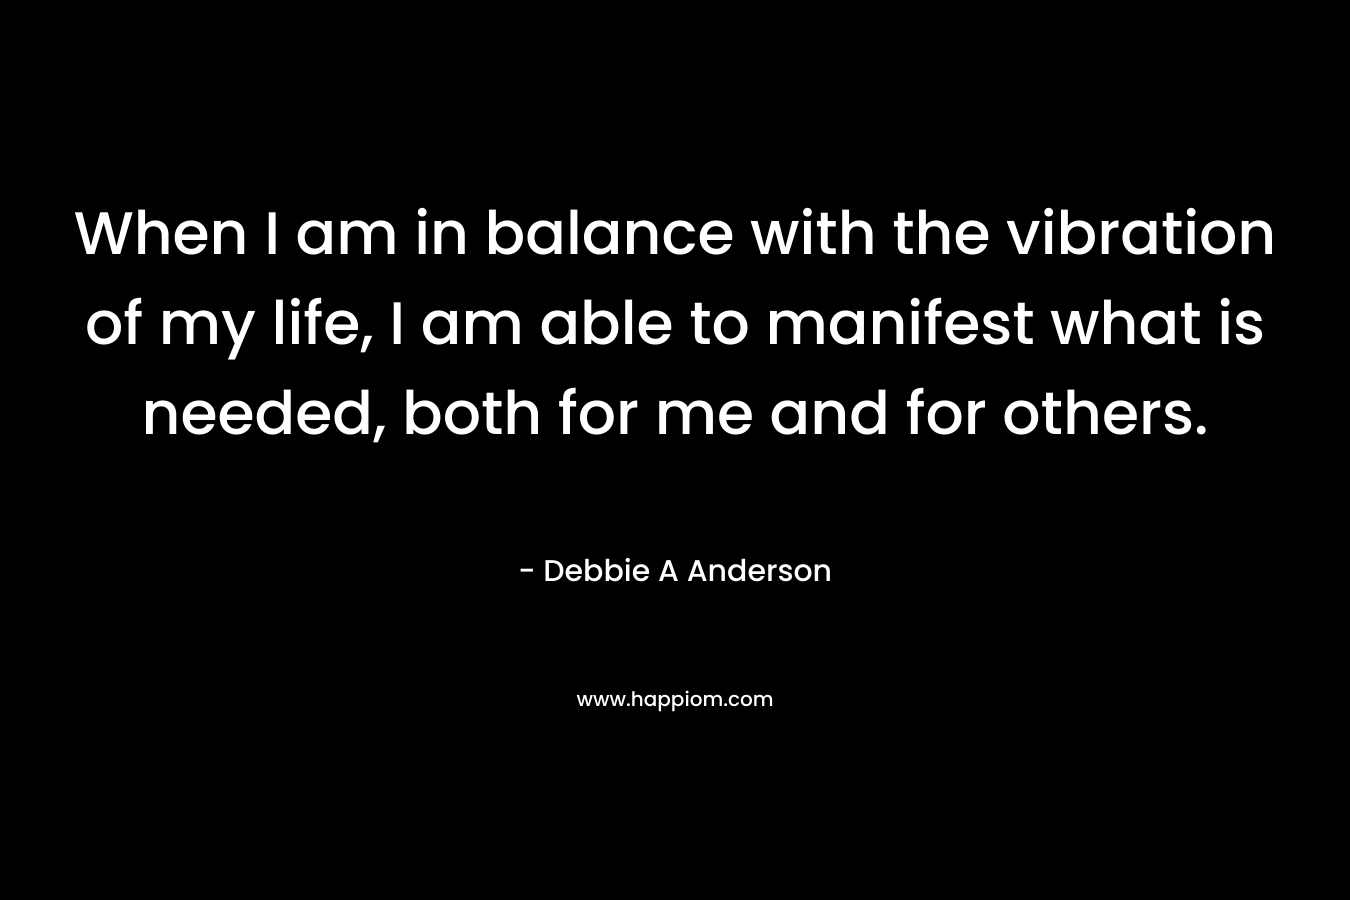 When I am in balance with the vibration of my life, I am able to manifest what is needed, both for me and for others. – Debbie A Anderson